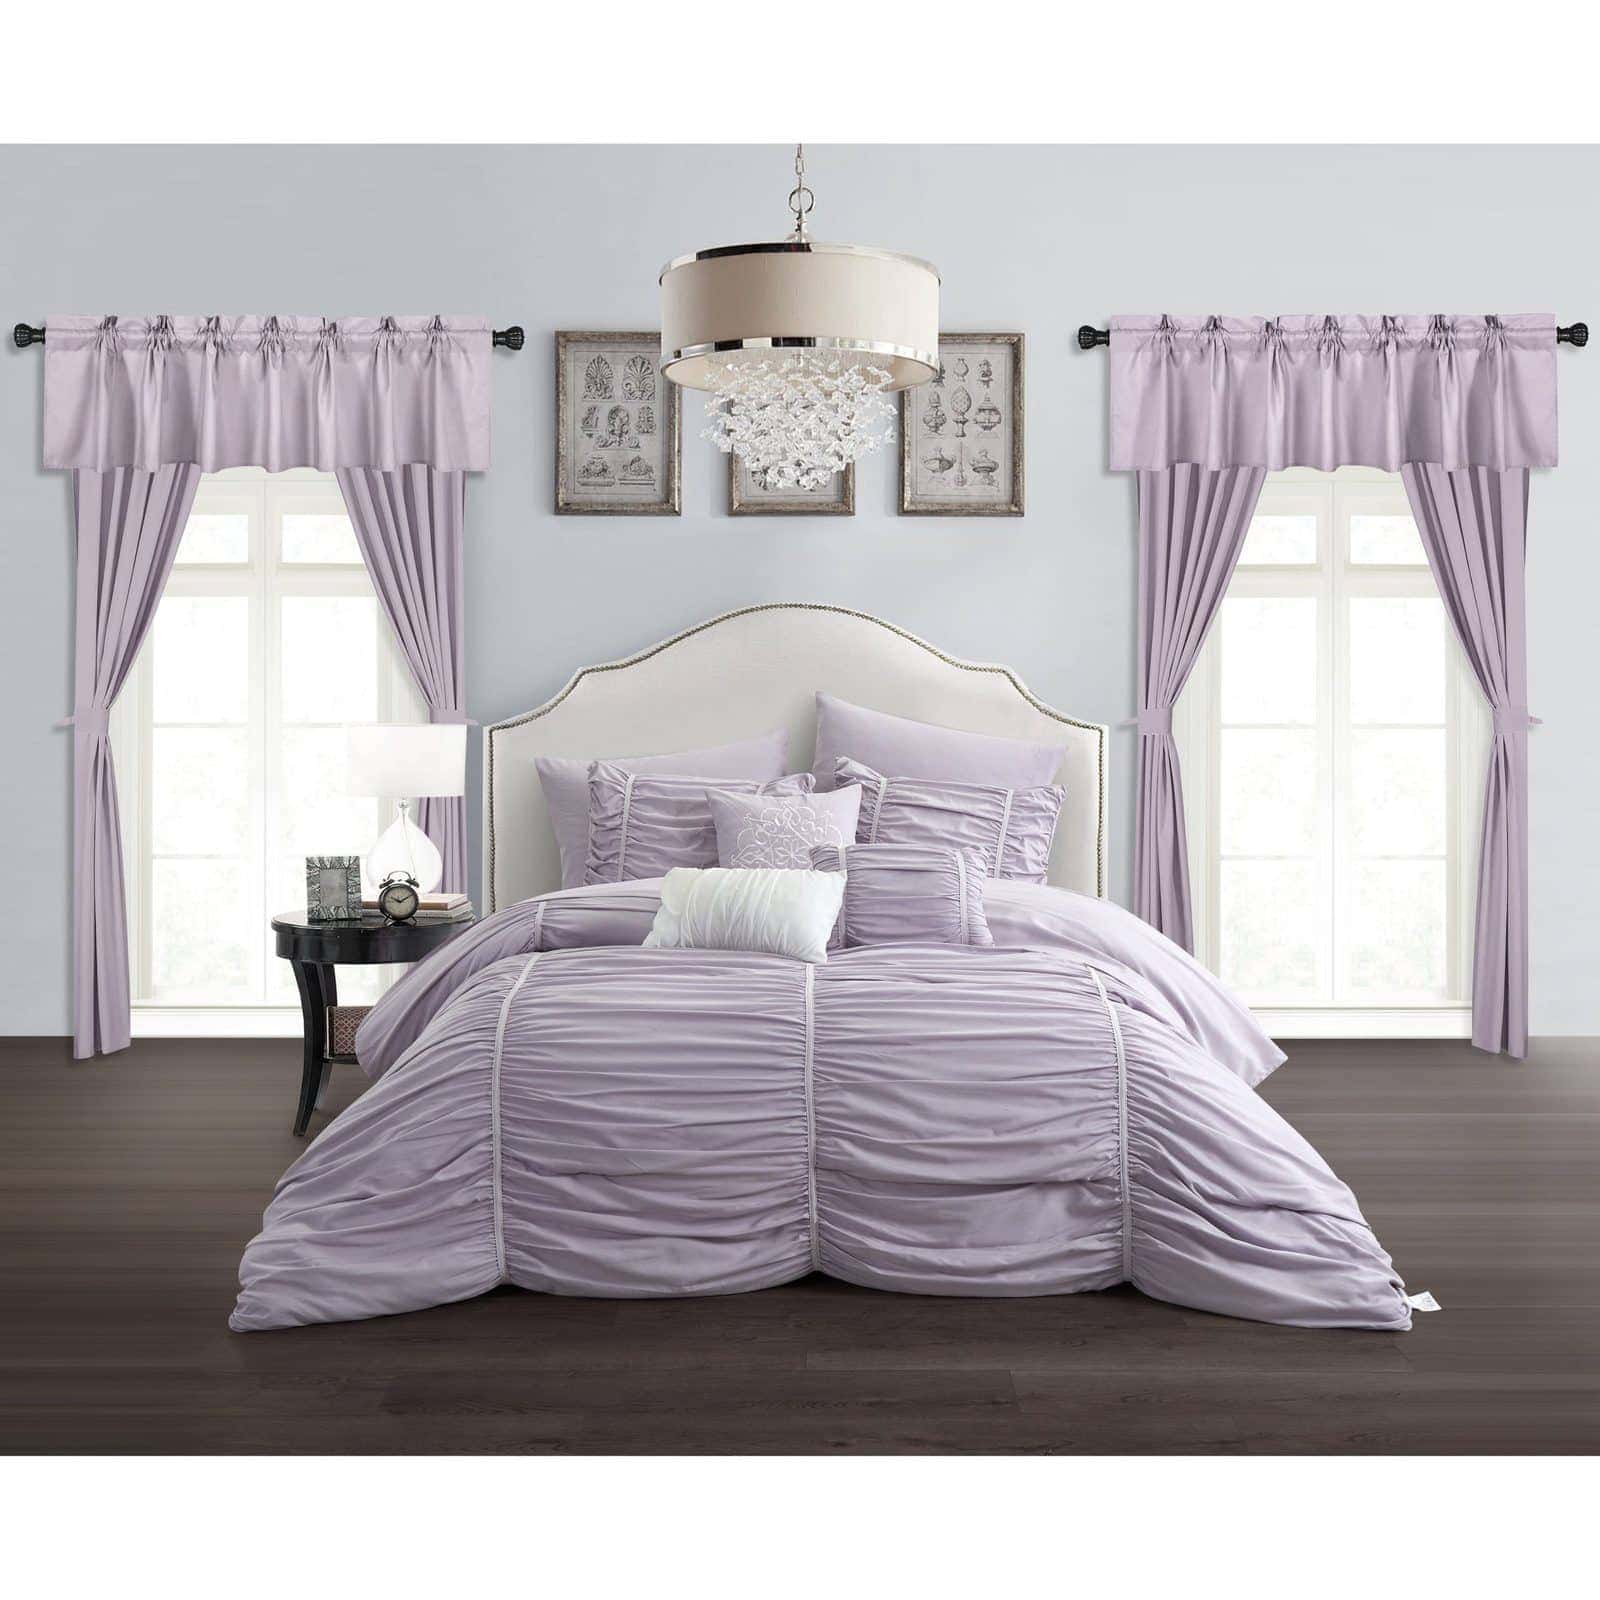 Create a Traditional Look With Matching Comforter and Drapes